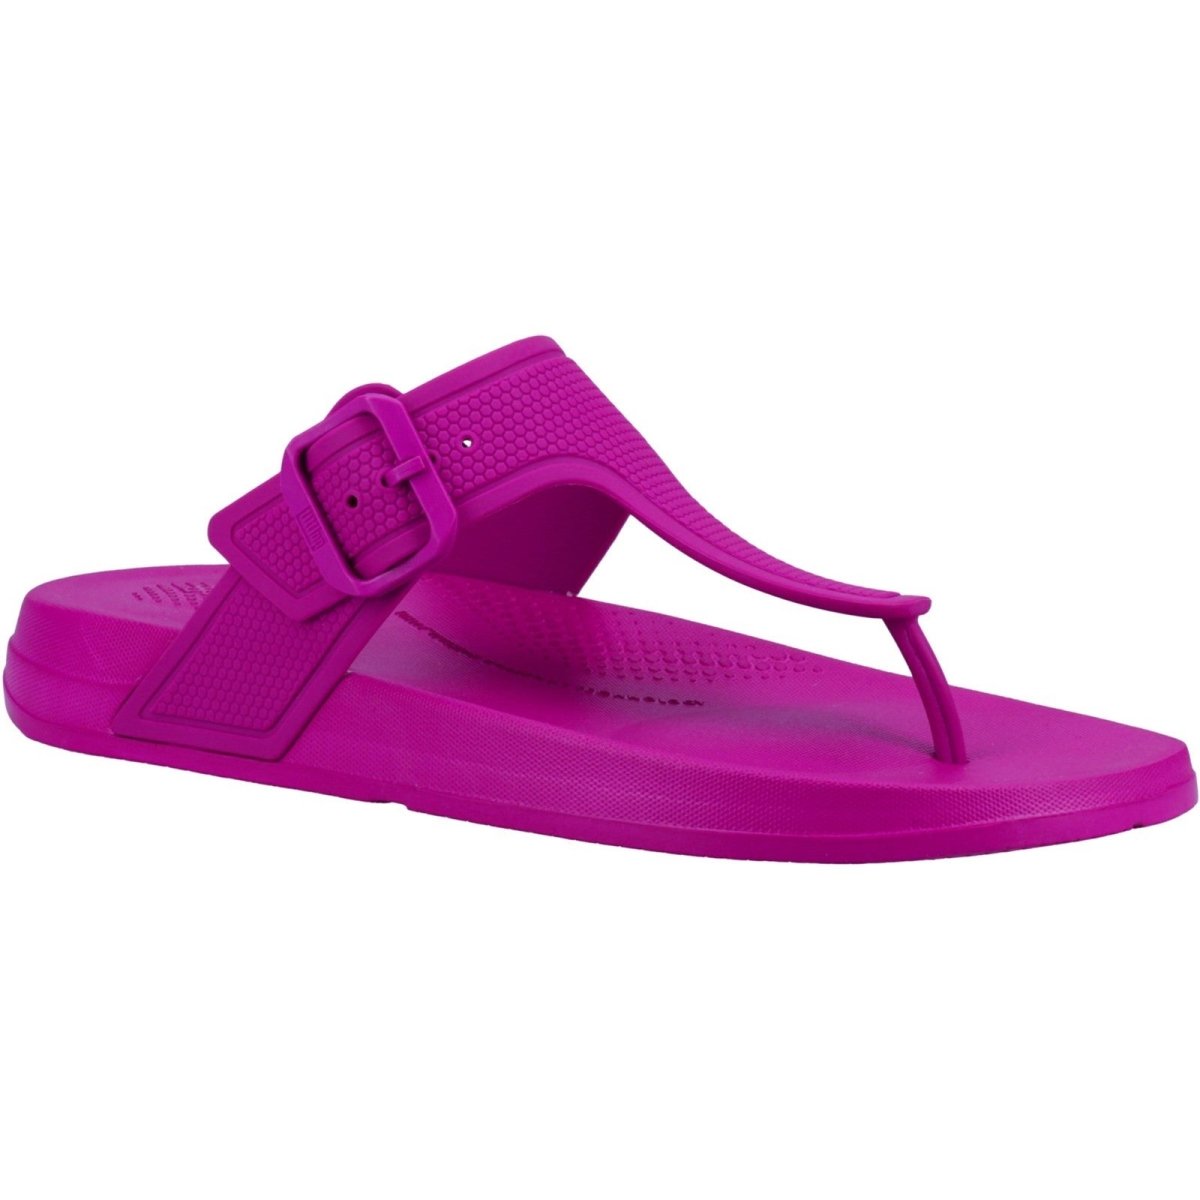 Fitflop iQUSHION Ladies Adjustable Buckle Toe Post Flip-Flops - Shoe Store Direct